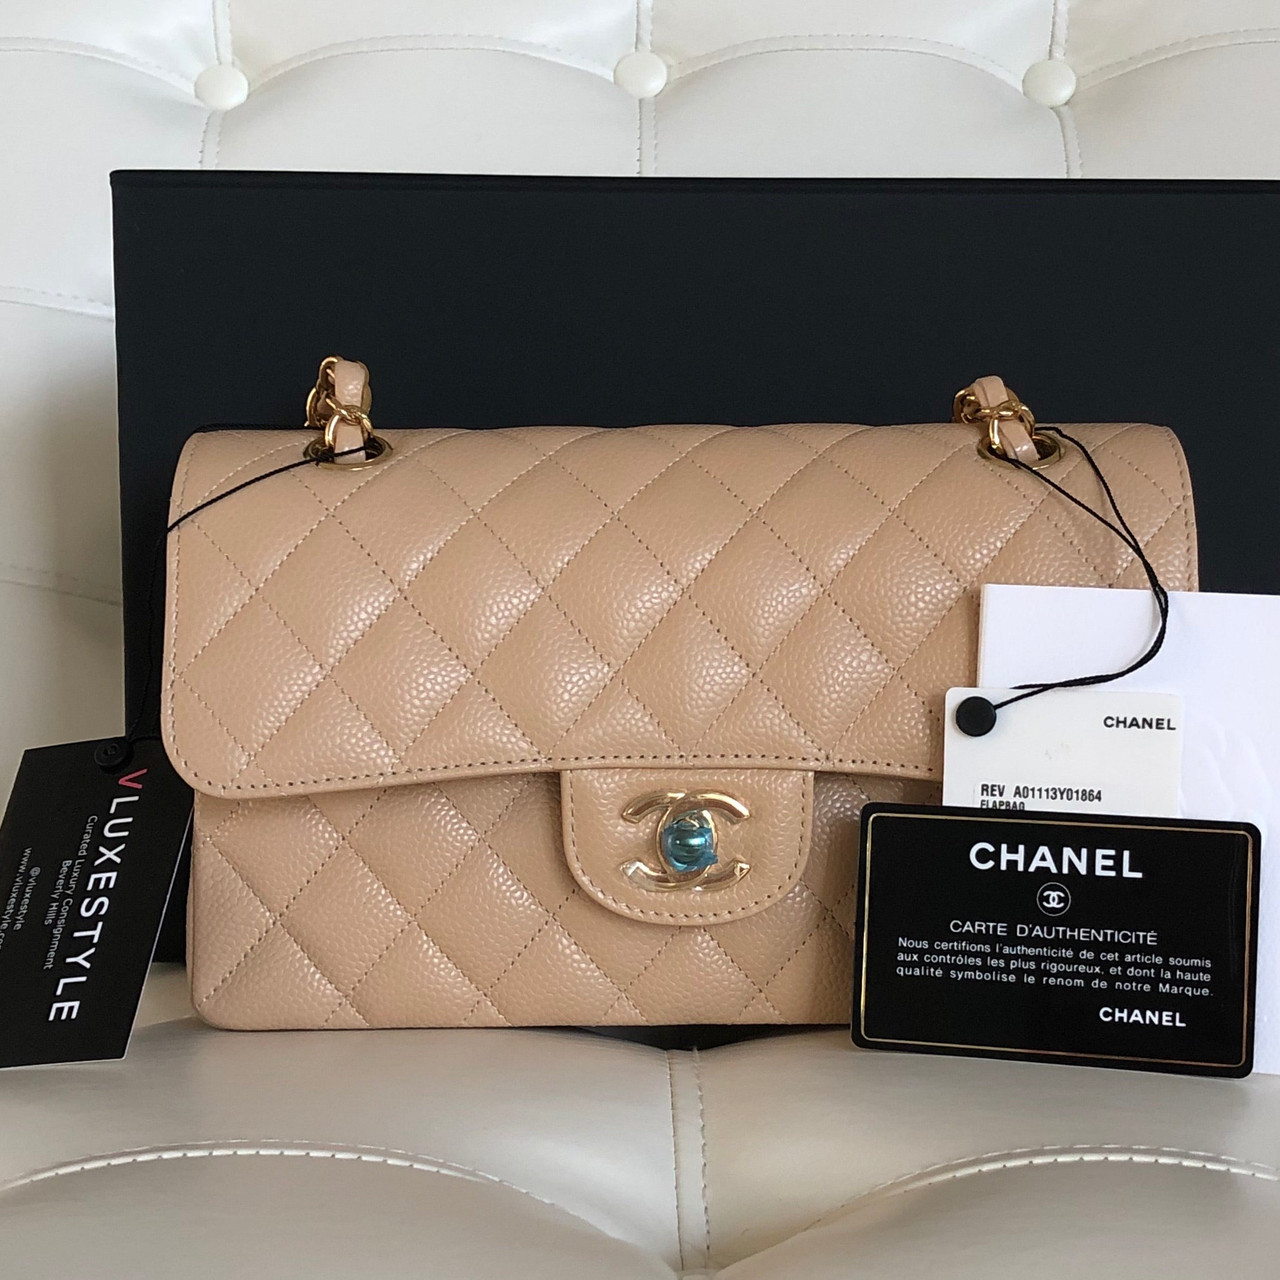 CHANEL BEIGE CLAIR UNBOXING  YouTube